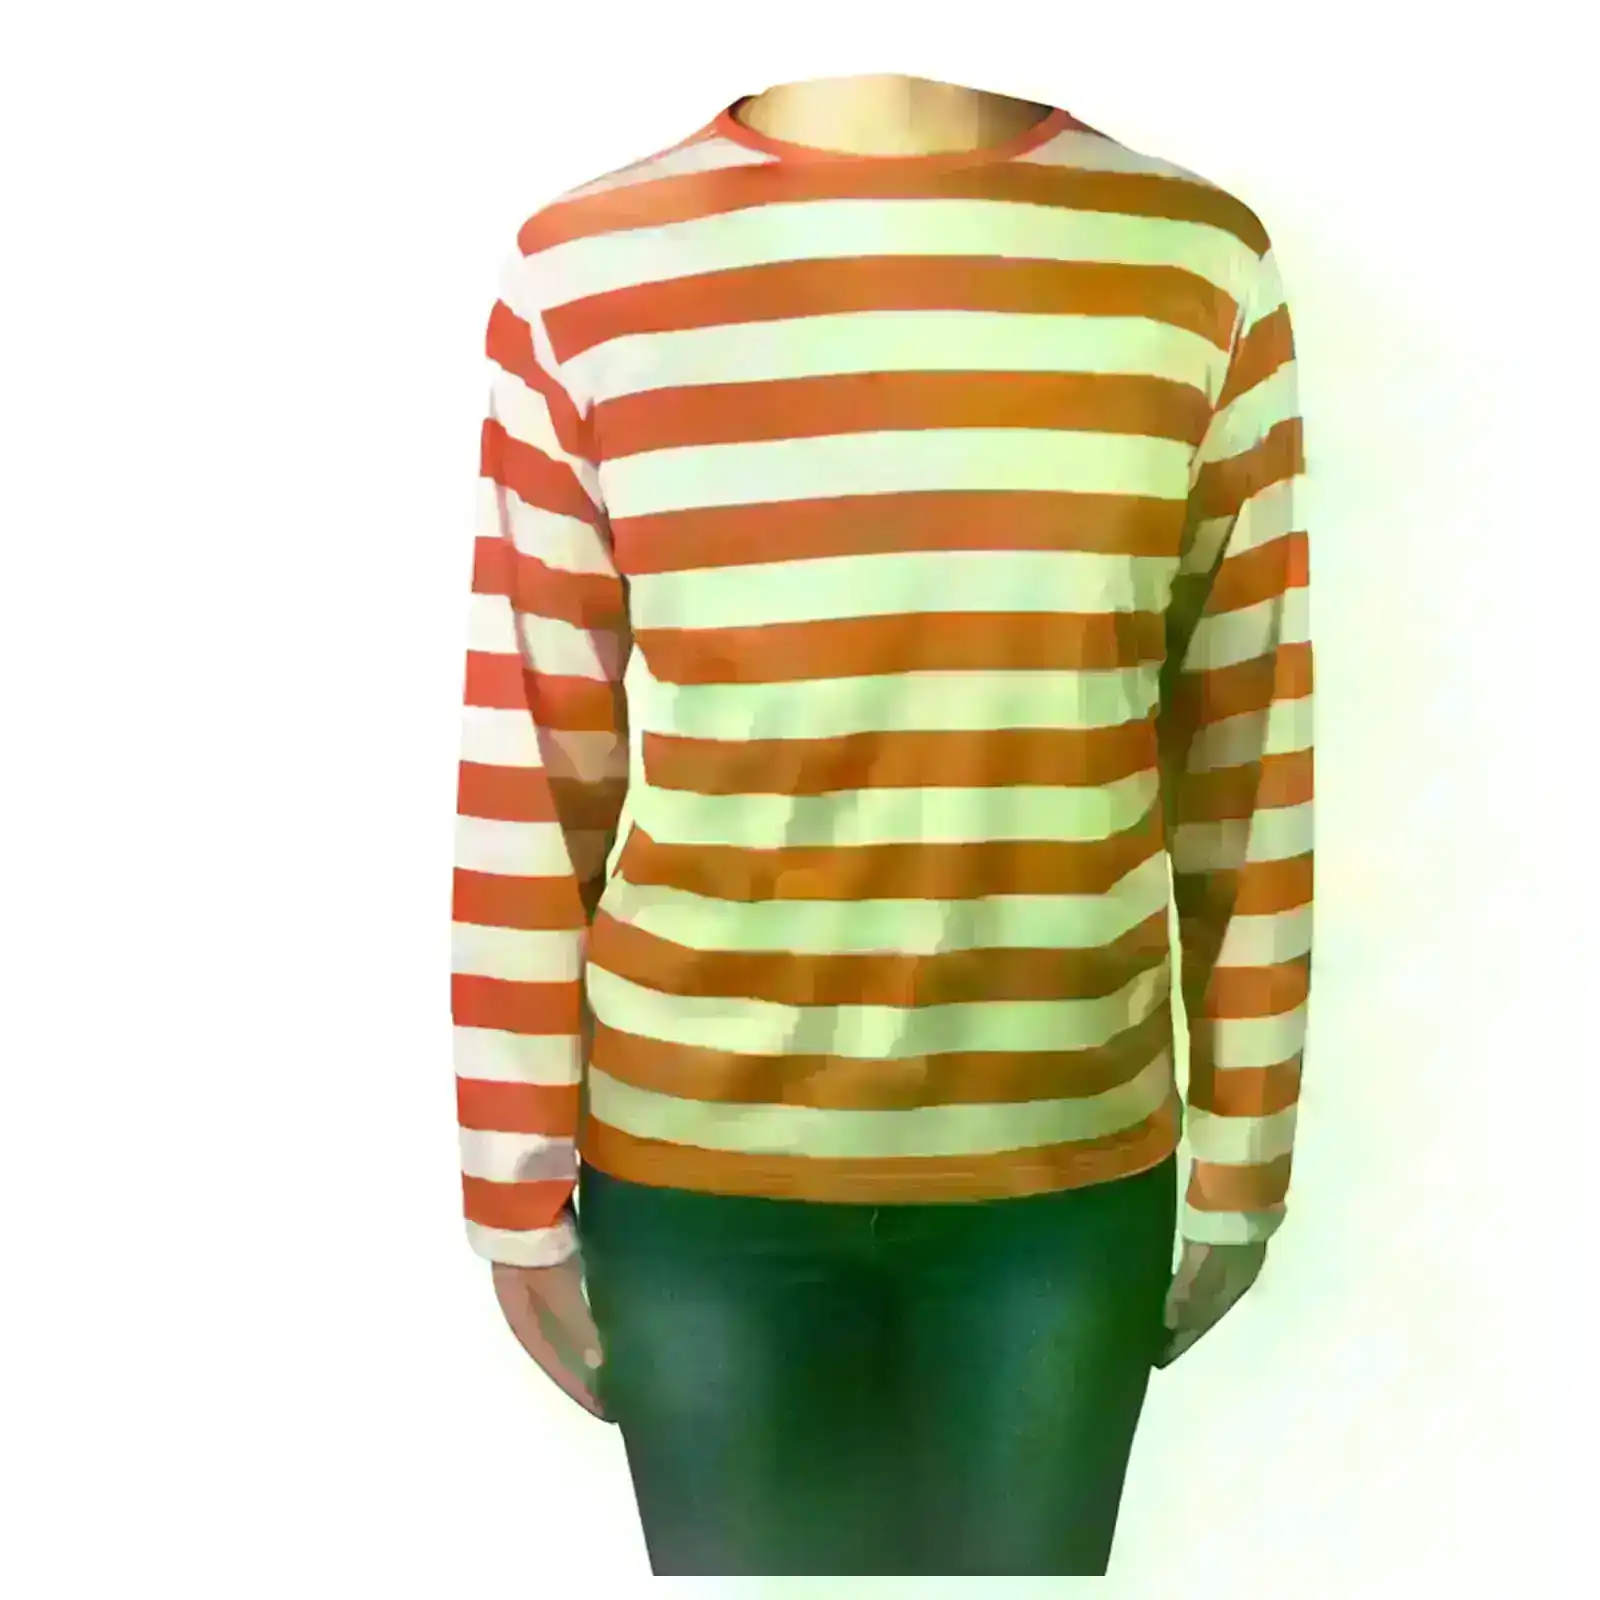 KIDS Red and White Striped Top Wheres Wally Wenda Waldo Shirt Costume Party Book Week